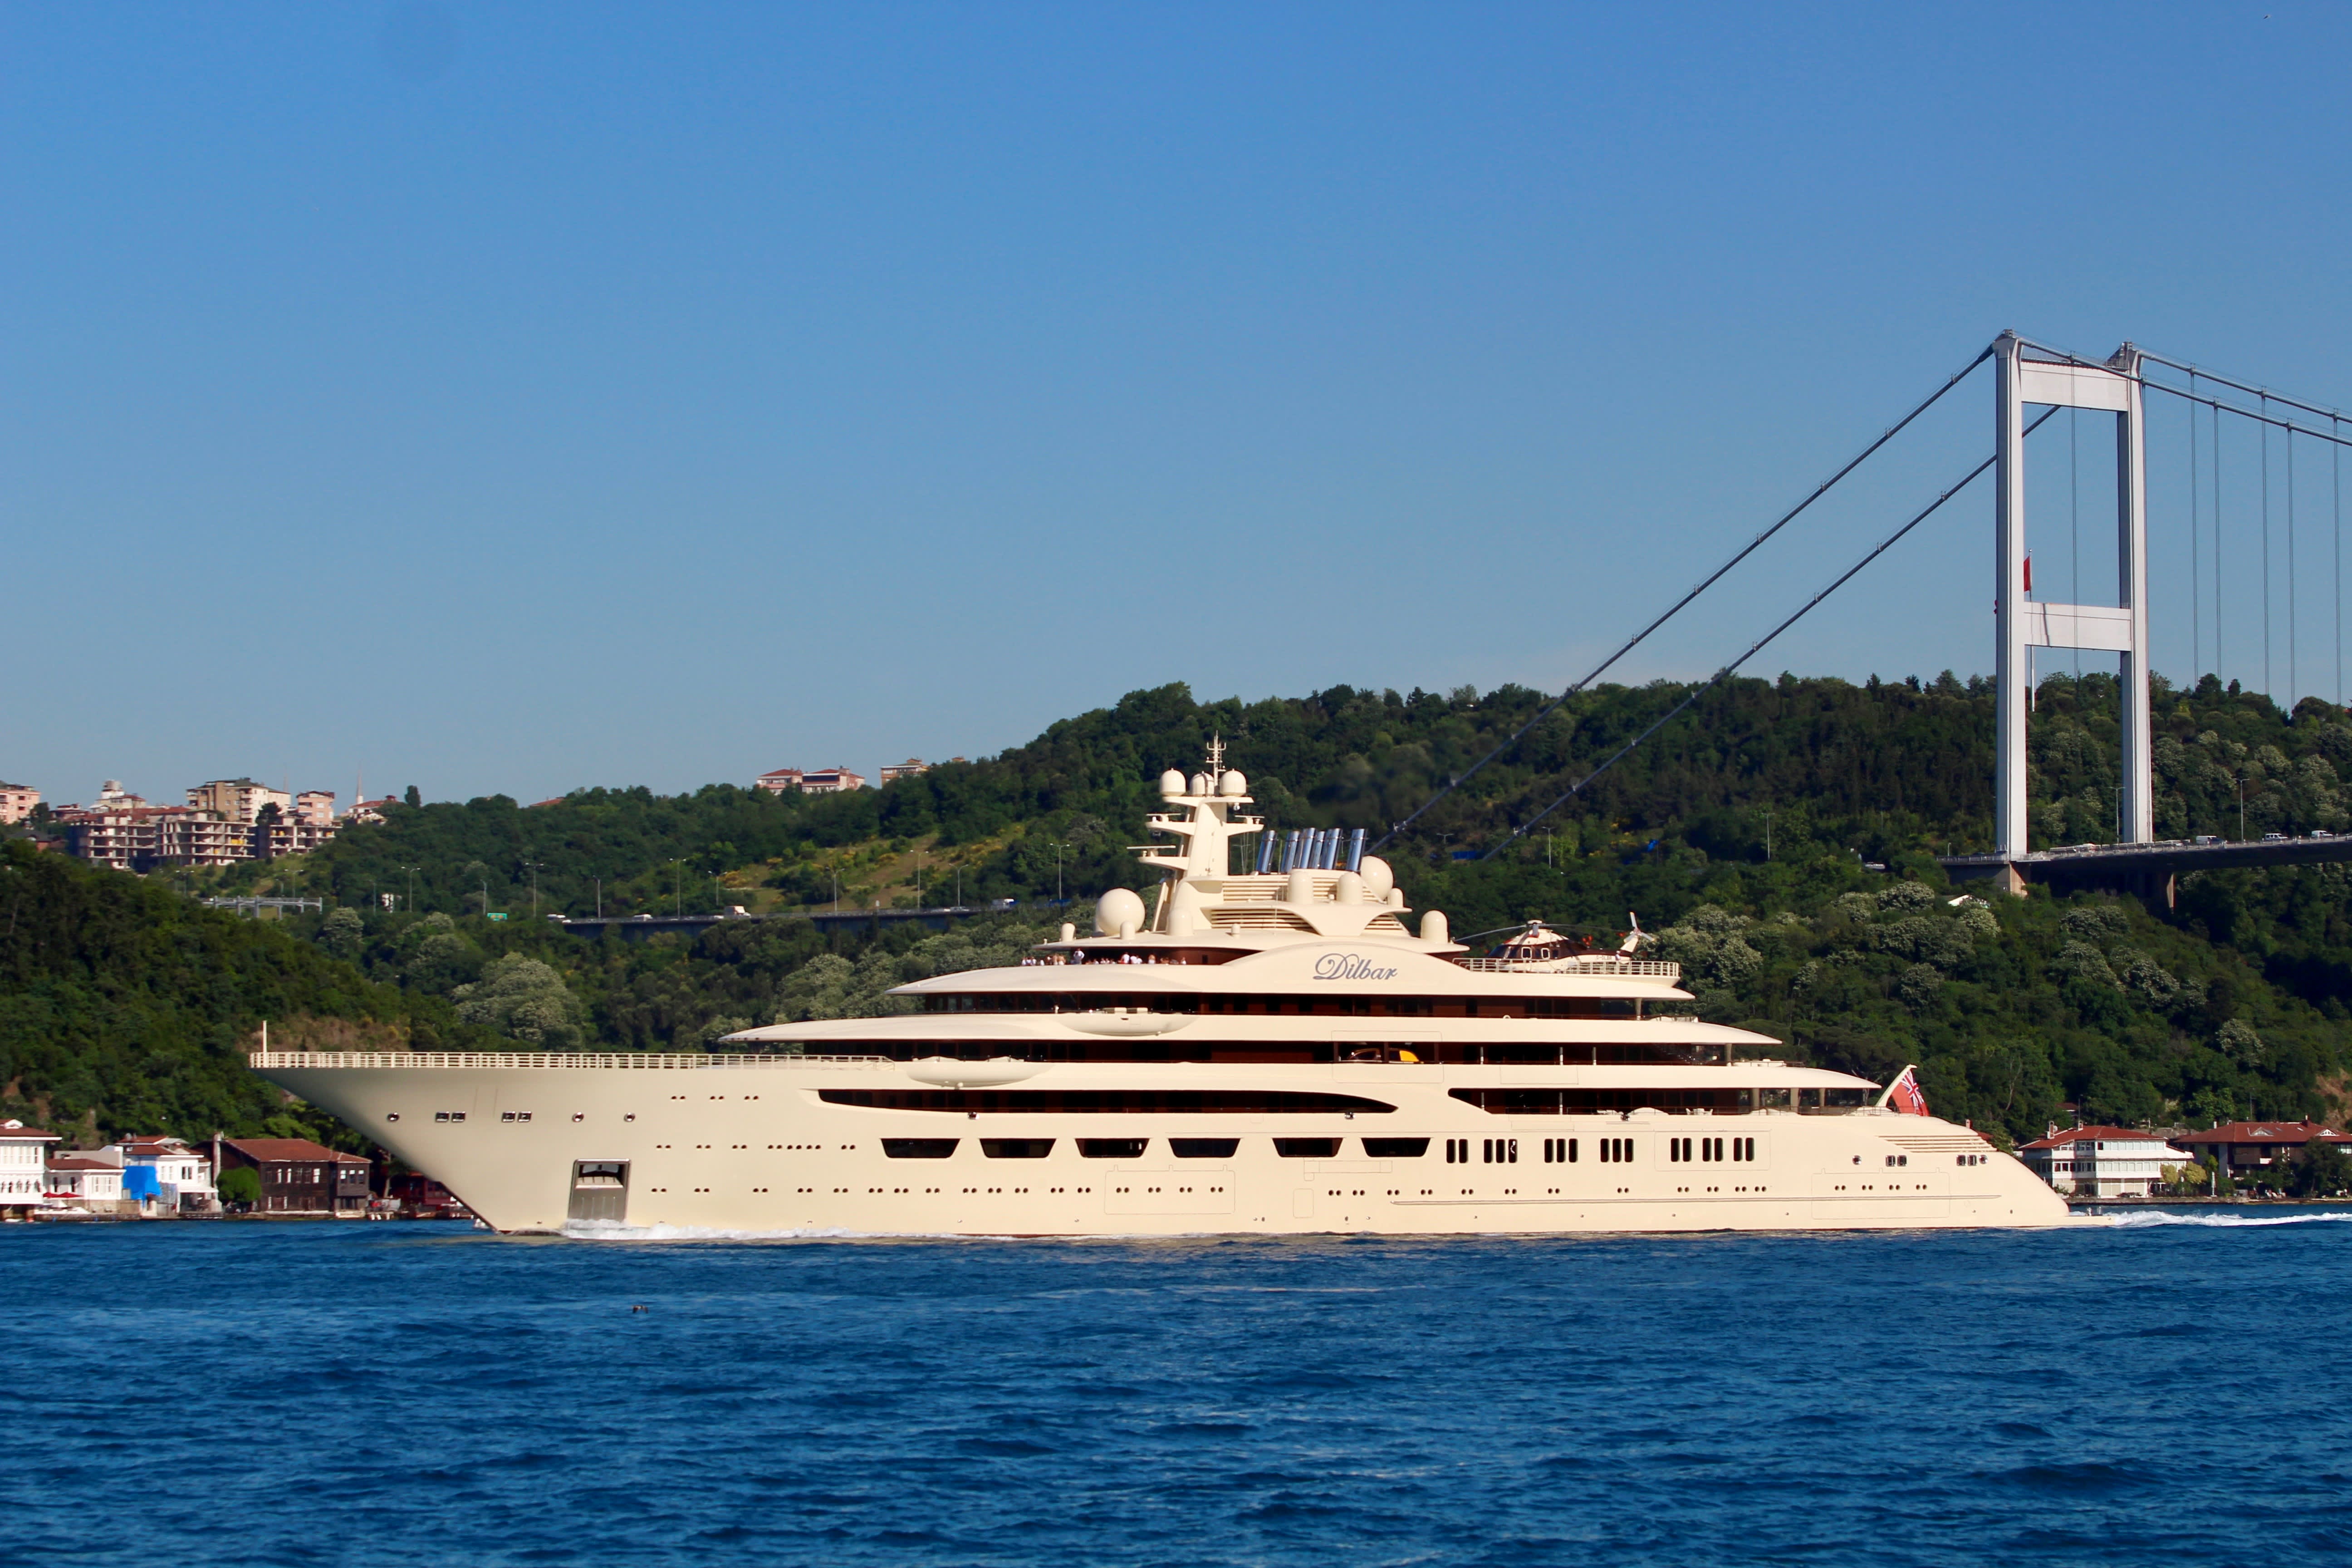 Russian oligarchs move yachts as U.S. looks to 'hunt down' and freeze assets